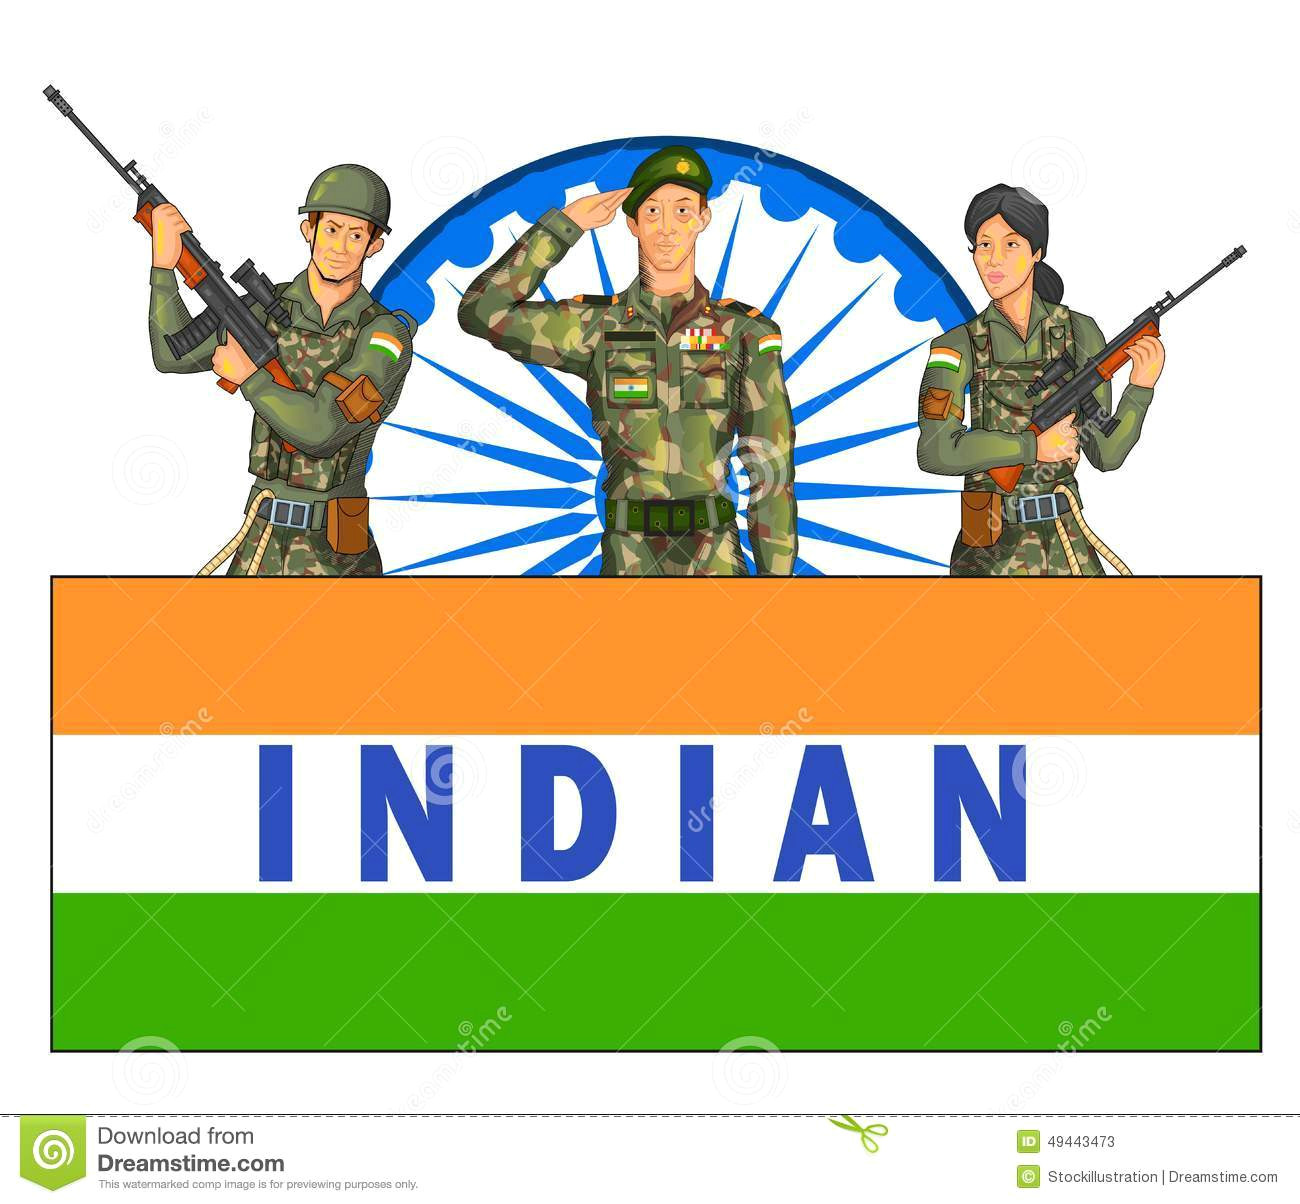 d2357400a811a8f68880b30a77884508 military clipart indian soldier pencil and in color military 1300 1204 jpeg